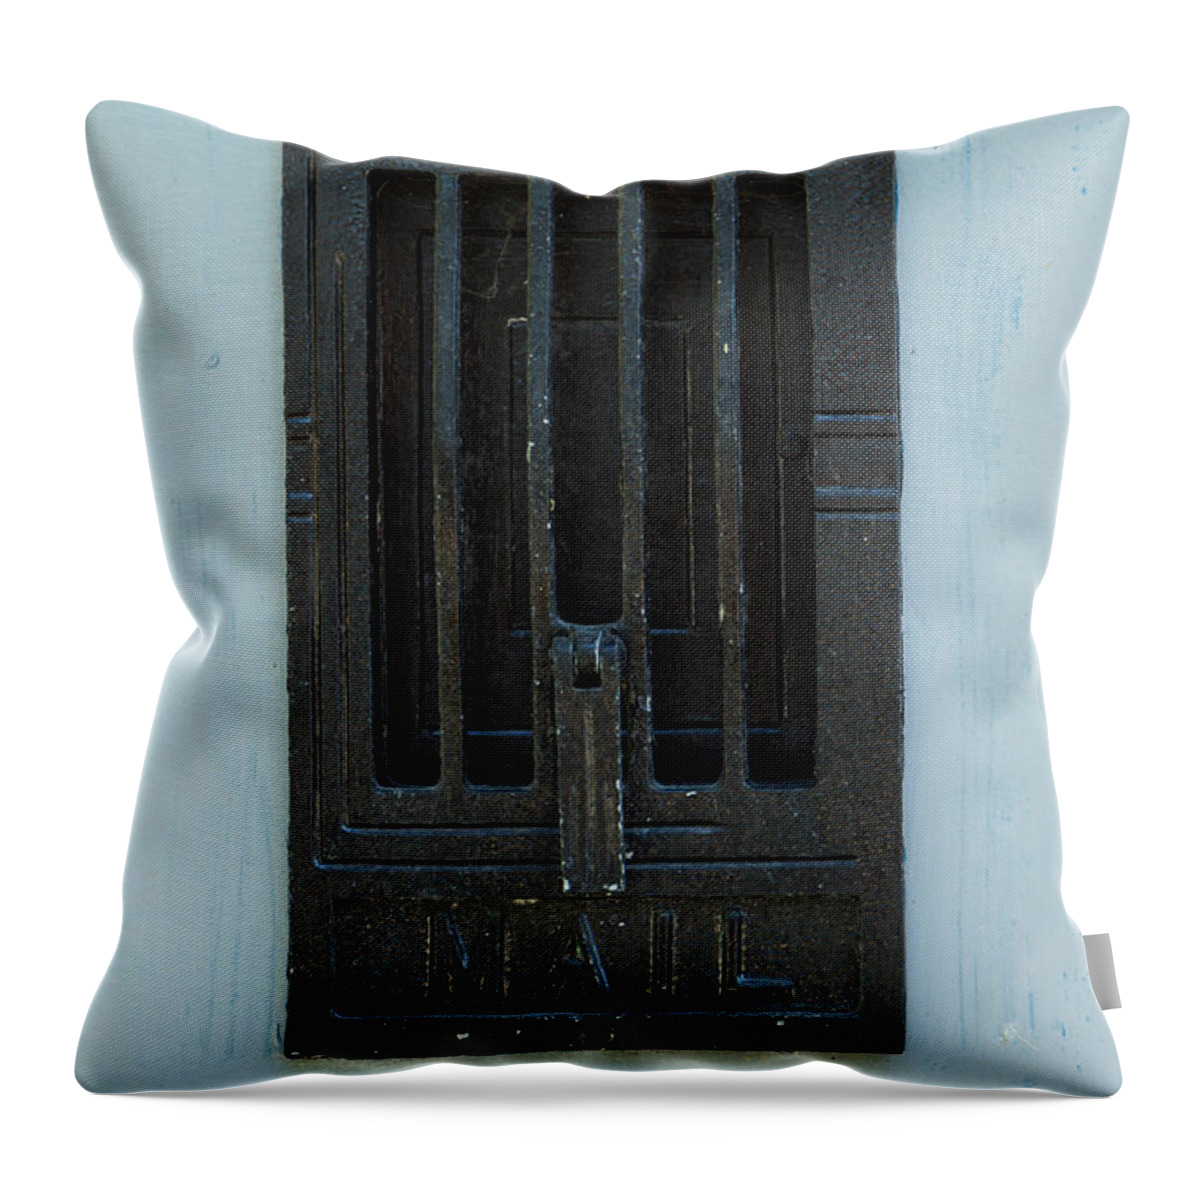 Mail Throw Pillow featuring the photograph Mail by Brigitte Mueller